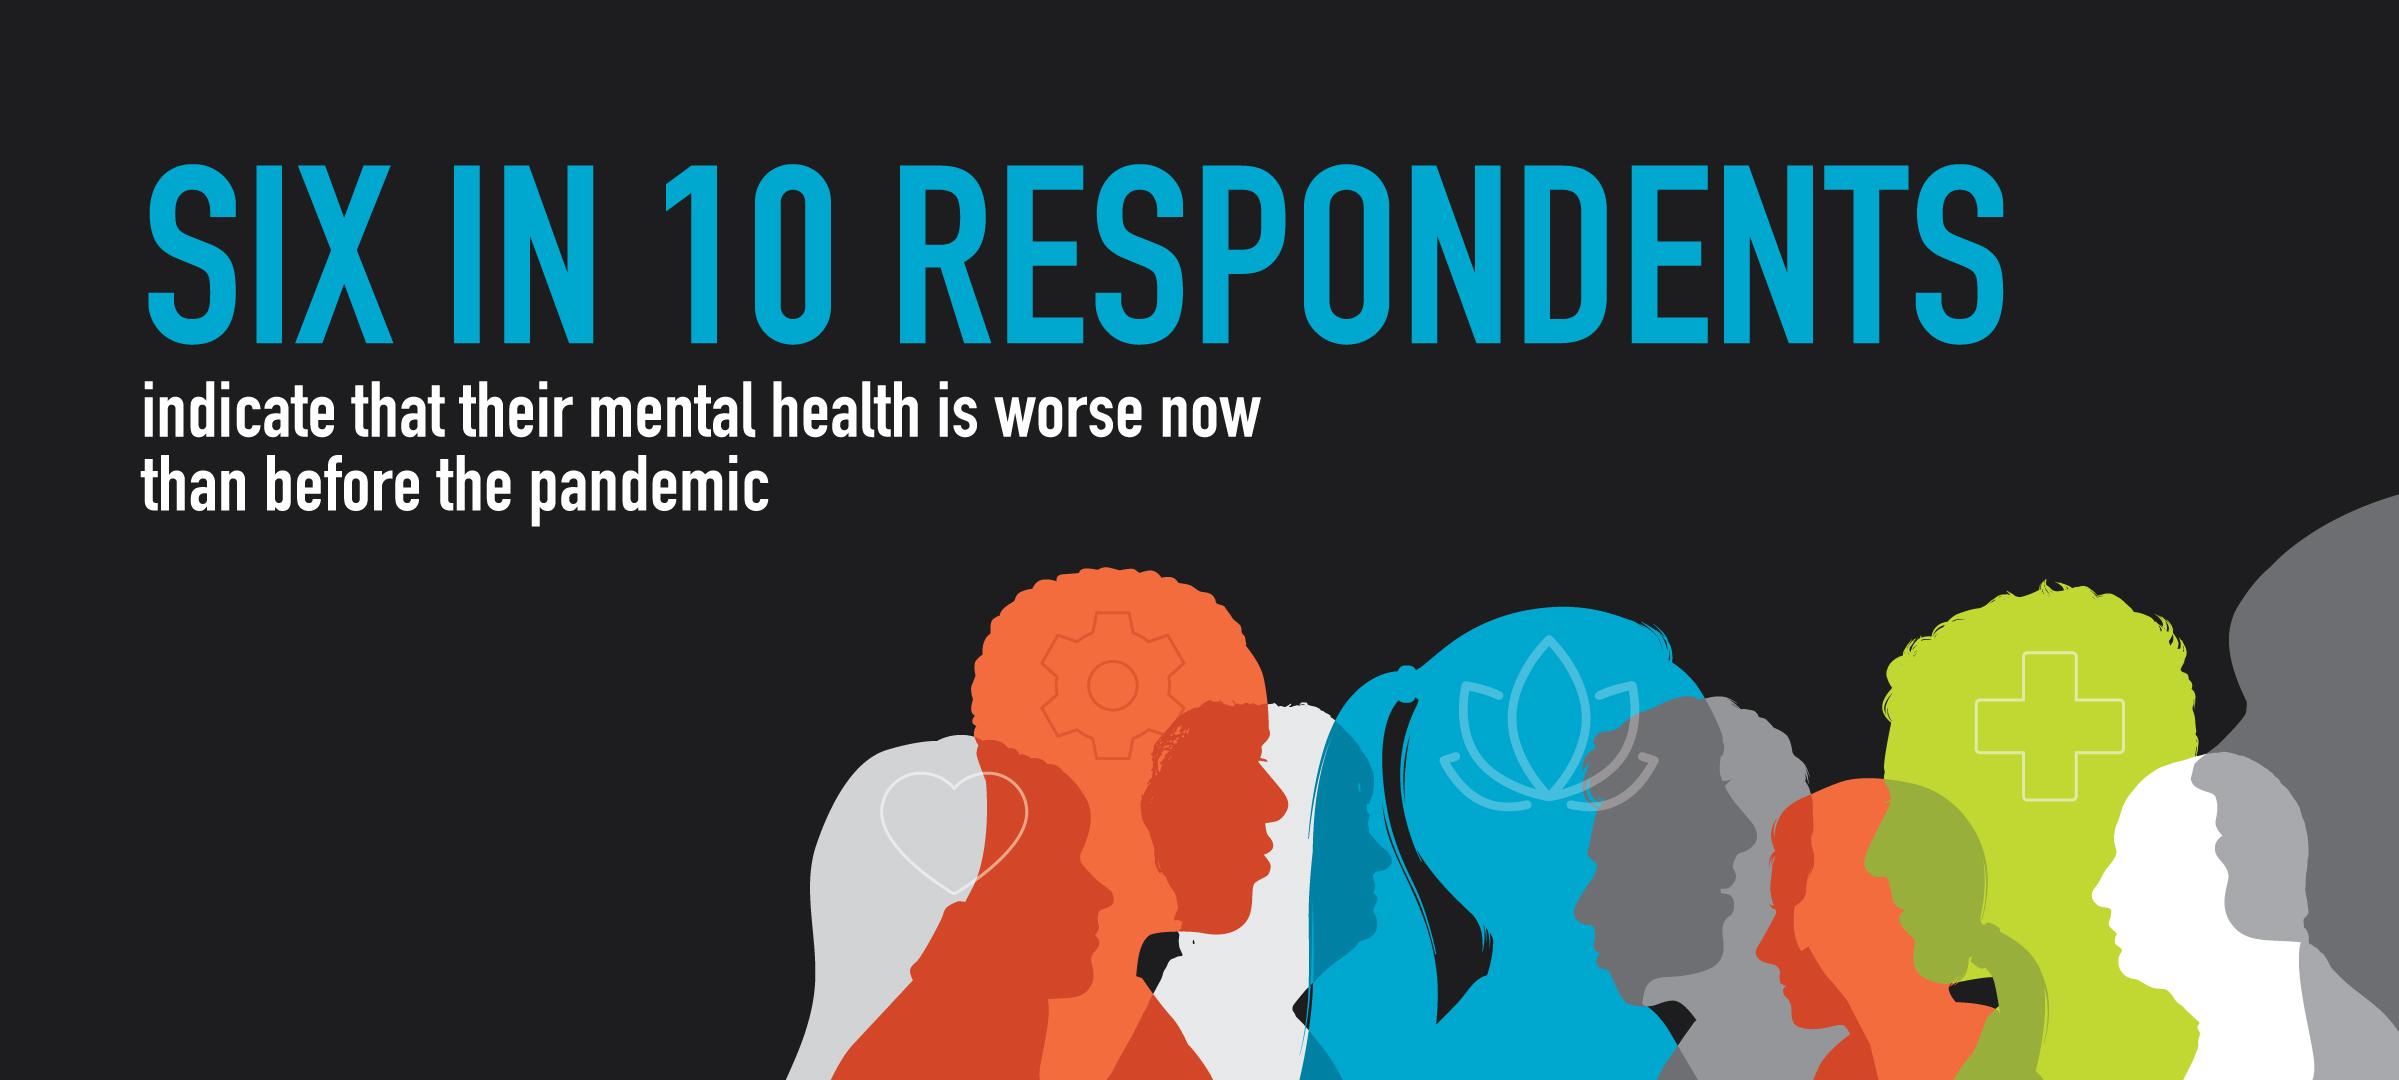 The COVID-19 pandemic: Six in 10 respondents indicate that their mental health is worse now than before the pandemic